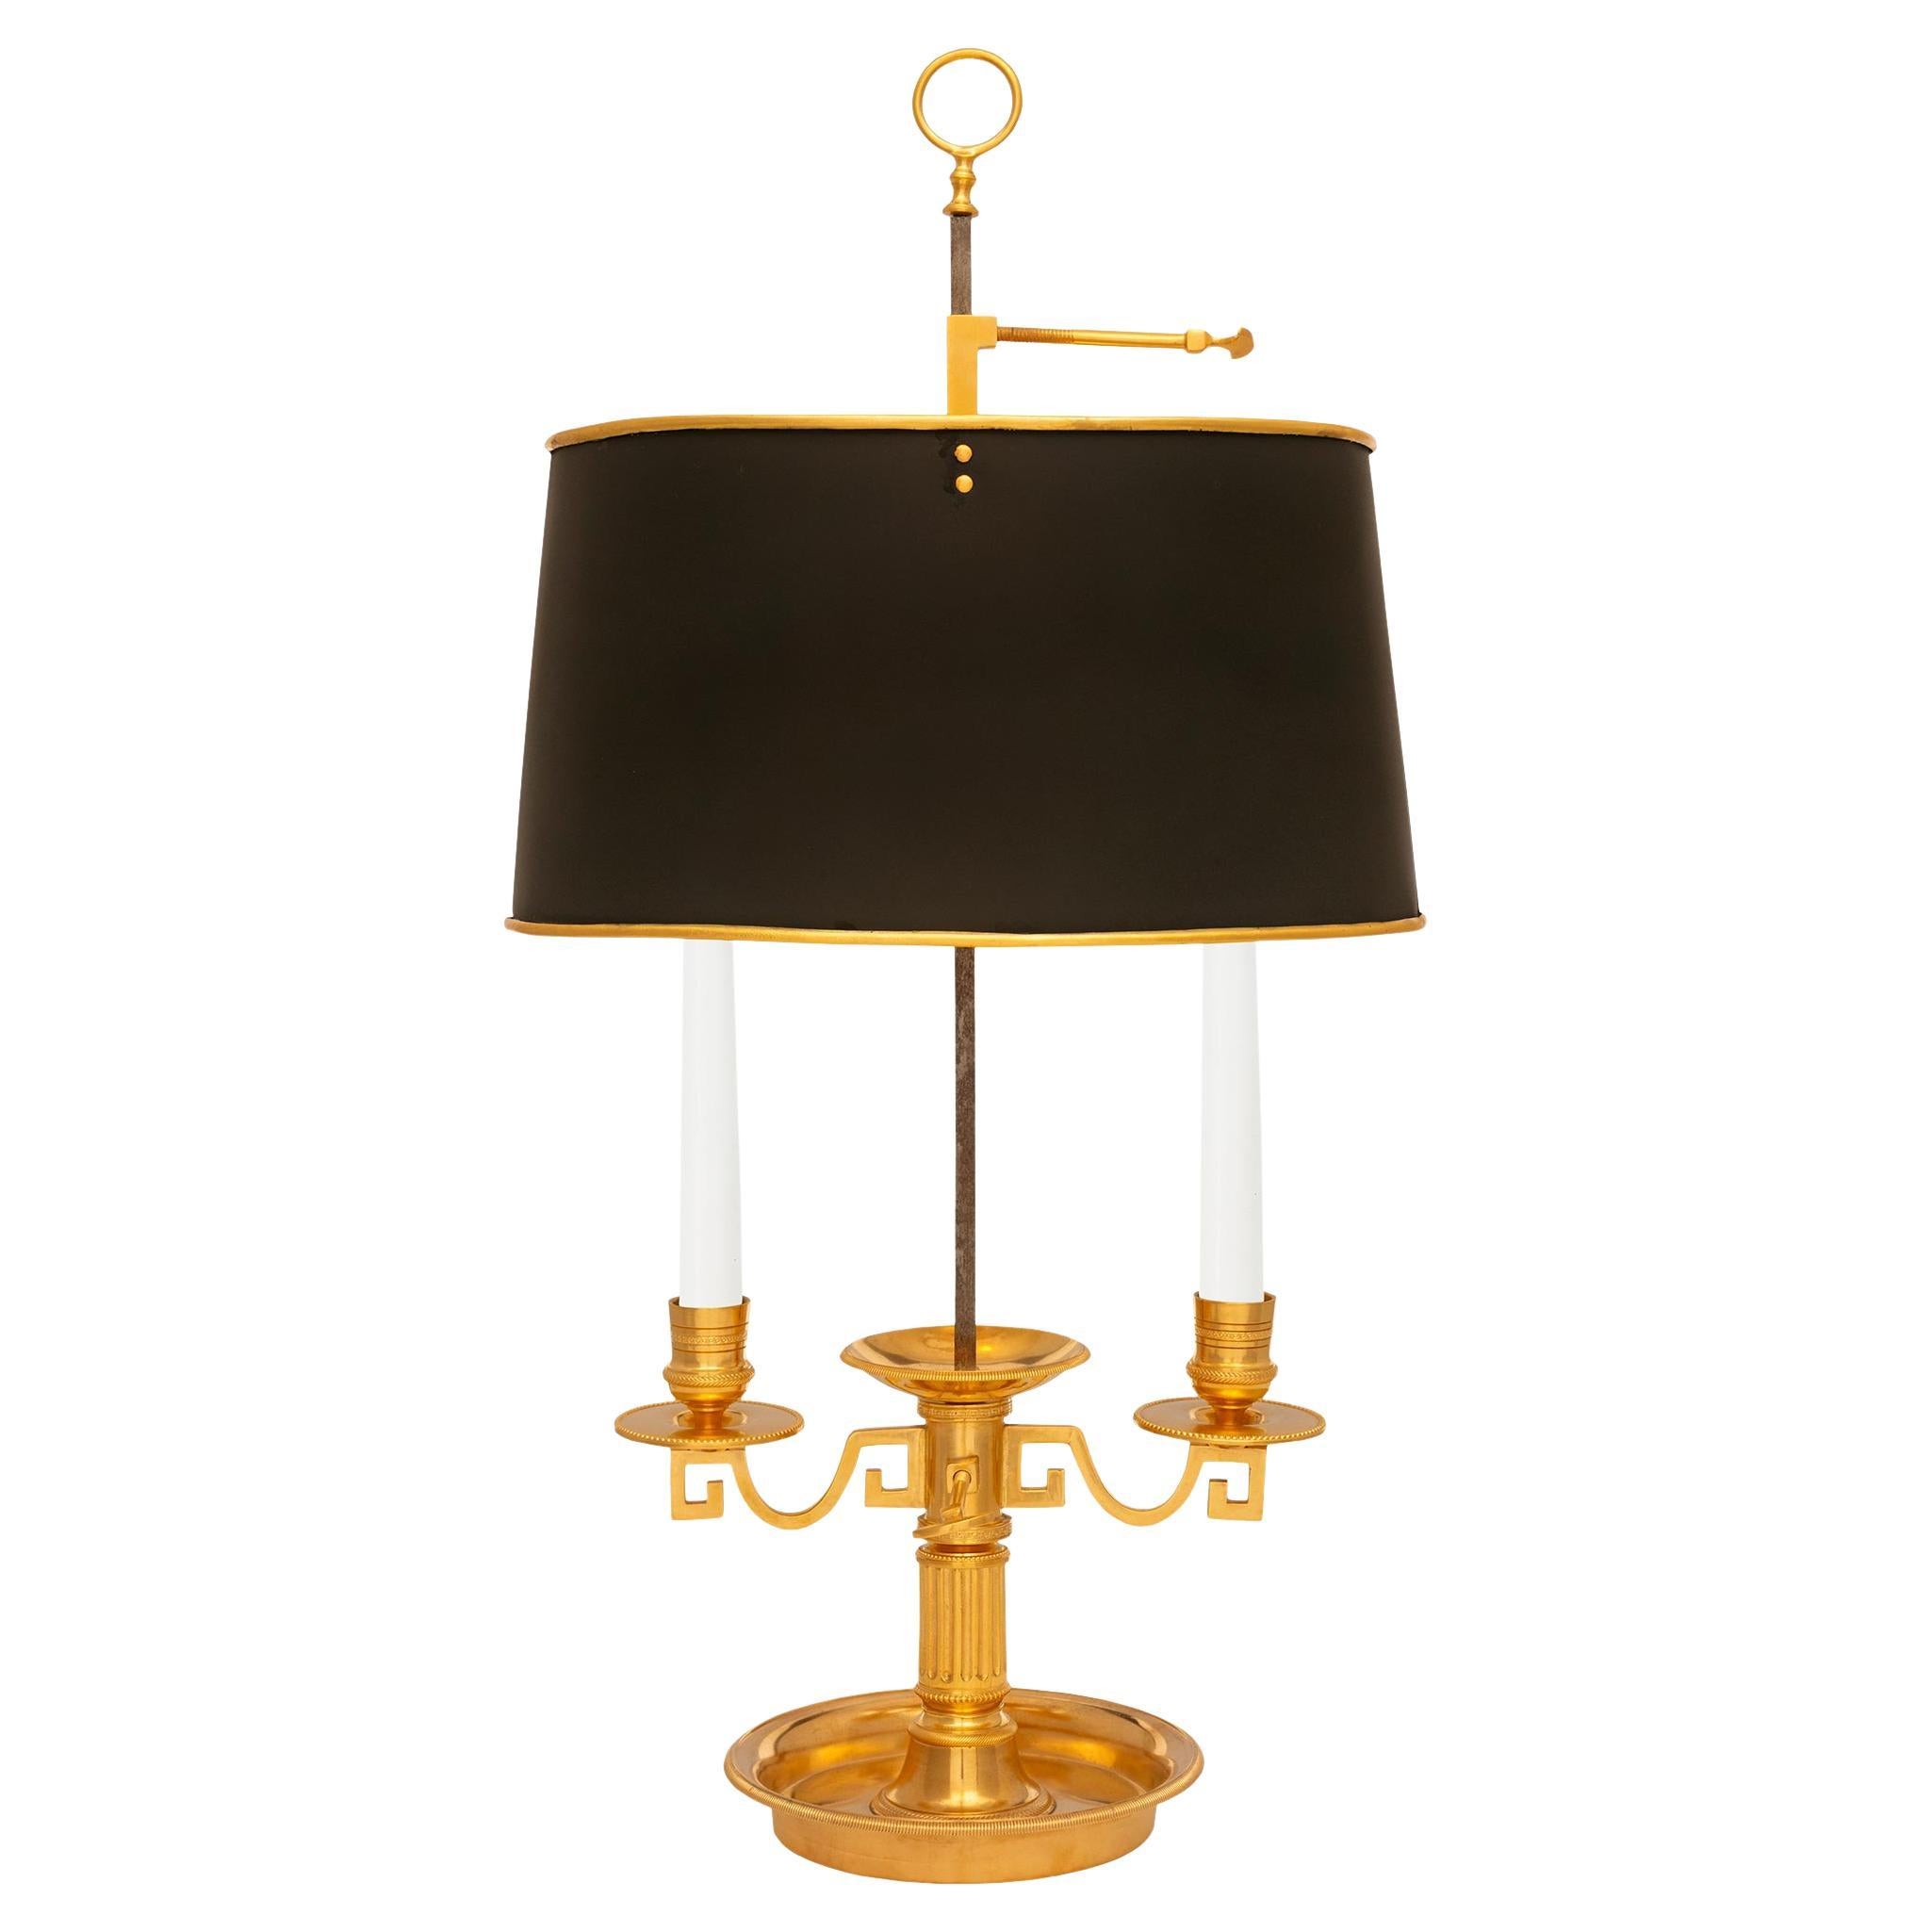 A French turn of the century Louis XVI st. Bouillotte lamp